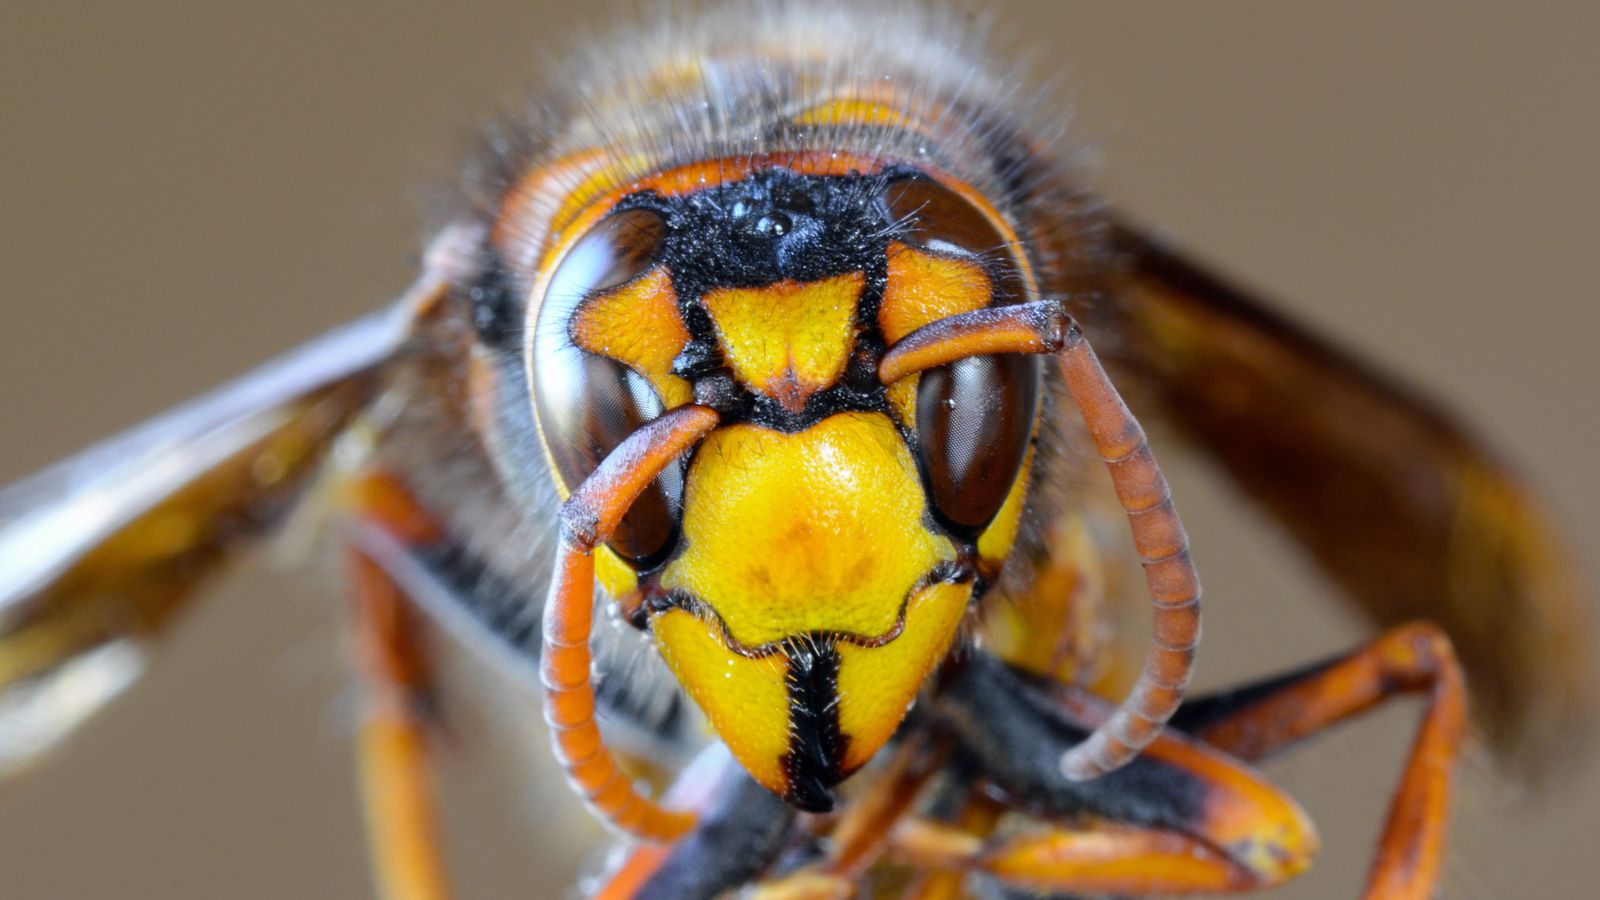 Asian hornets that can eat up to 50 honeybees a day could 'wreak havoc' if they become established in UK, expert warns